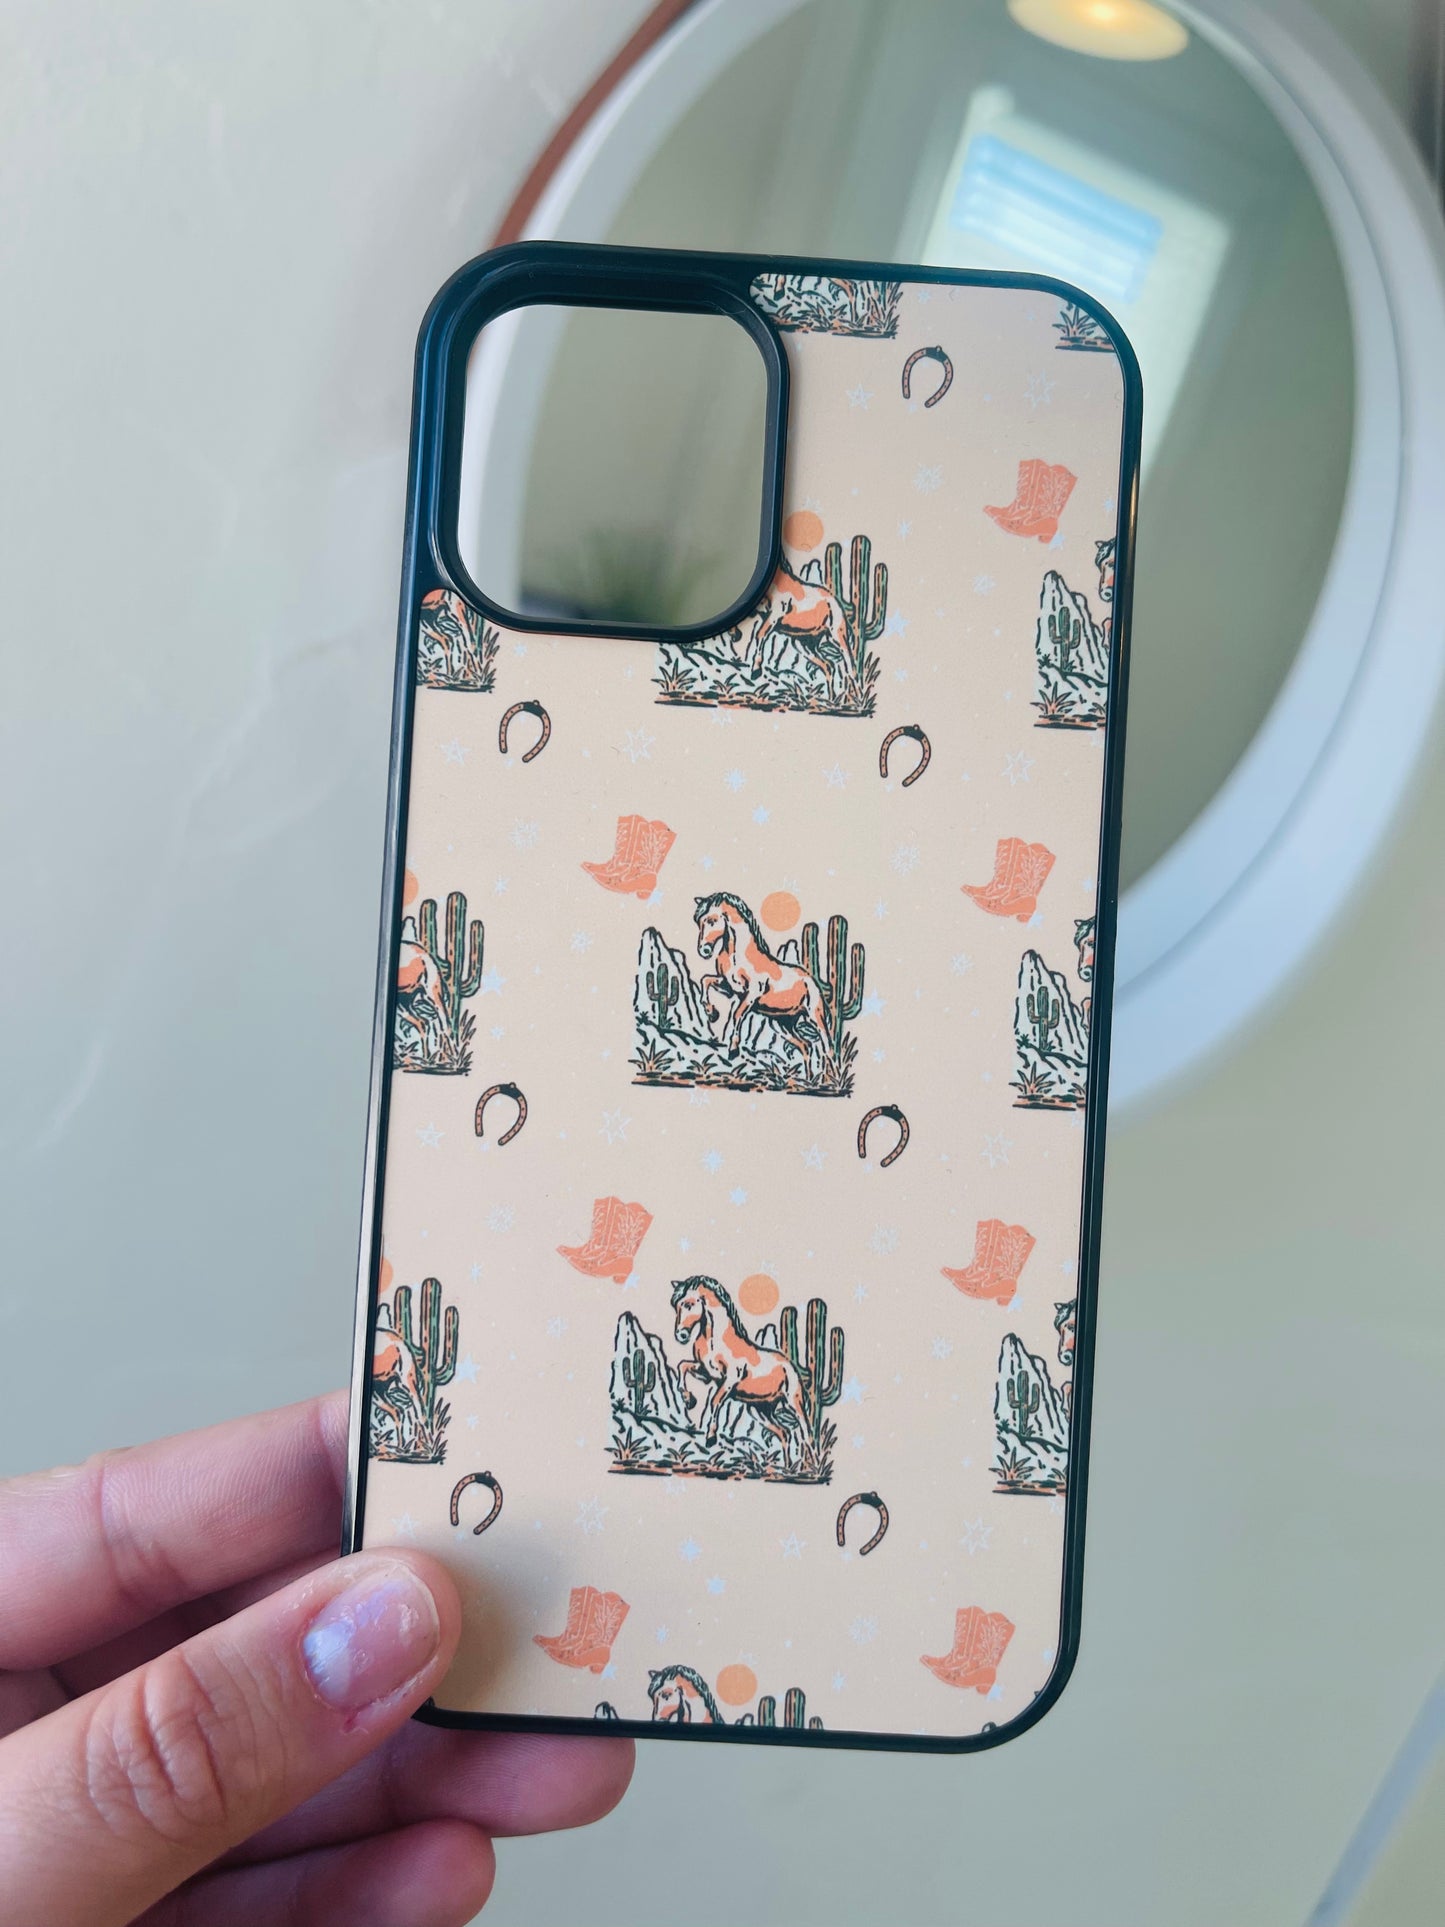 Wild and Free Phone Case